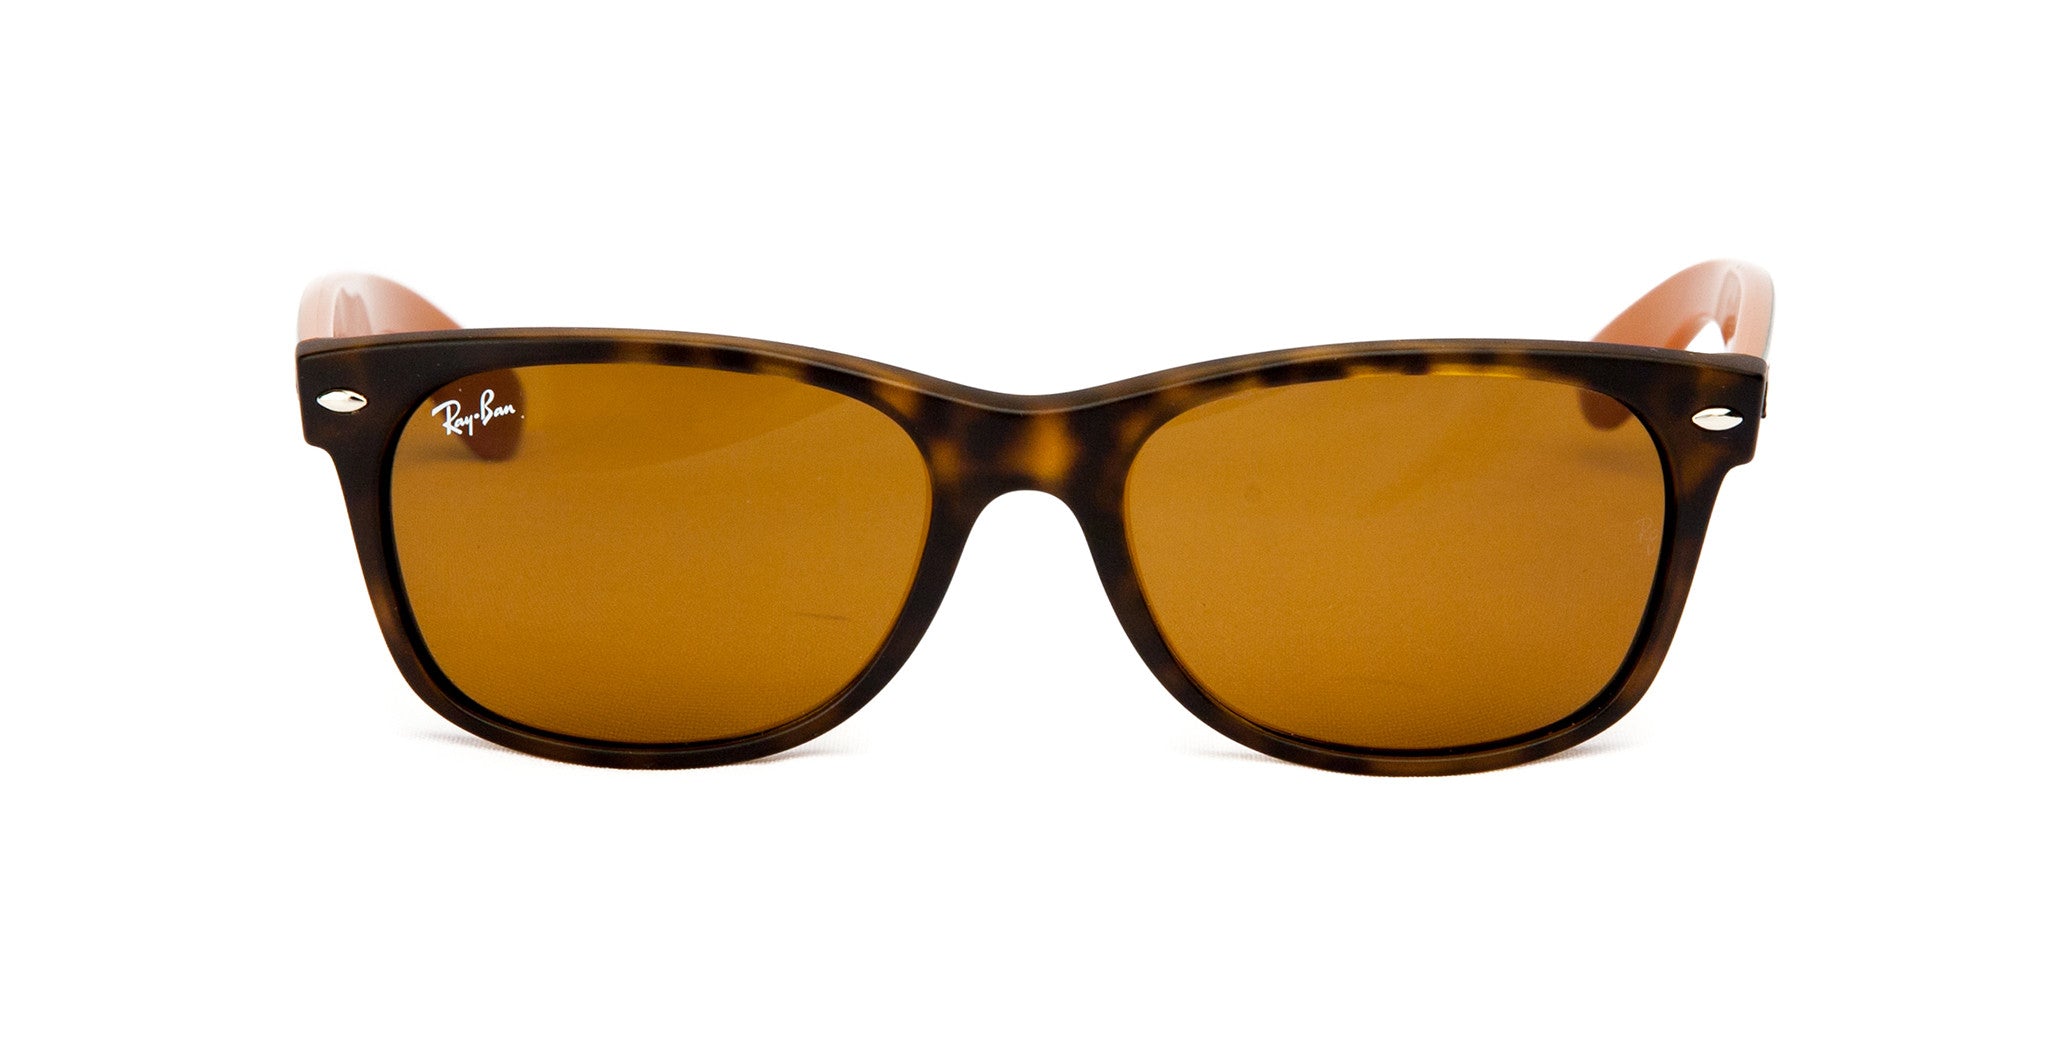 Ray Ban RB2132 6179 | Spectacle Shoppe Canada